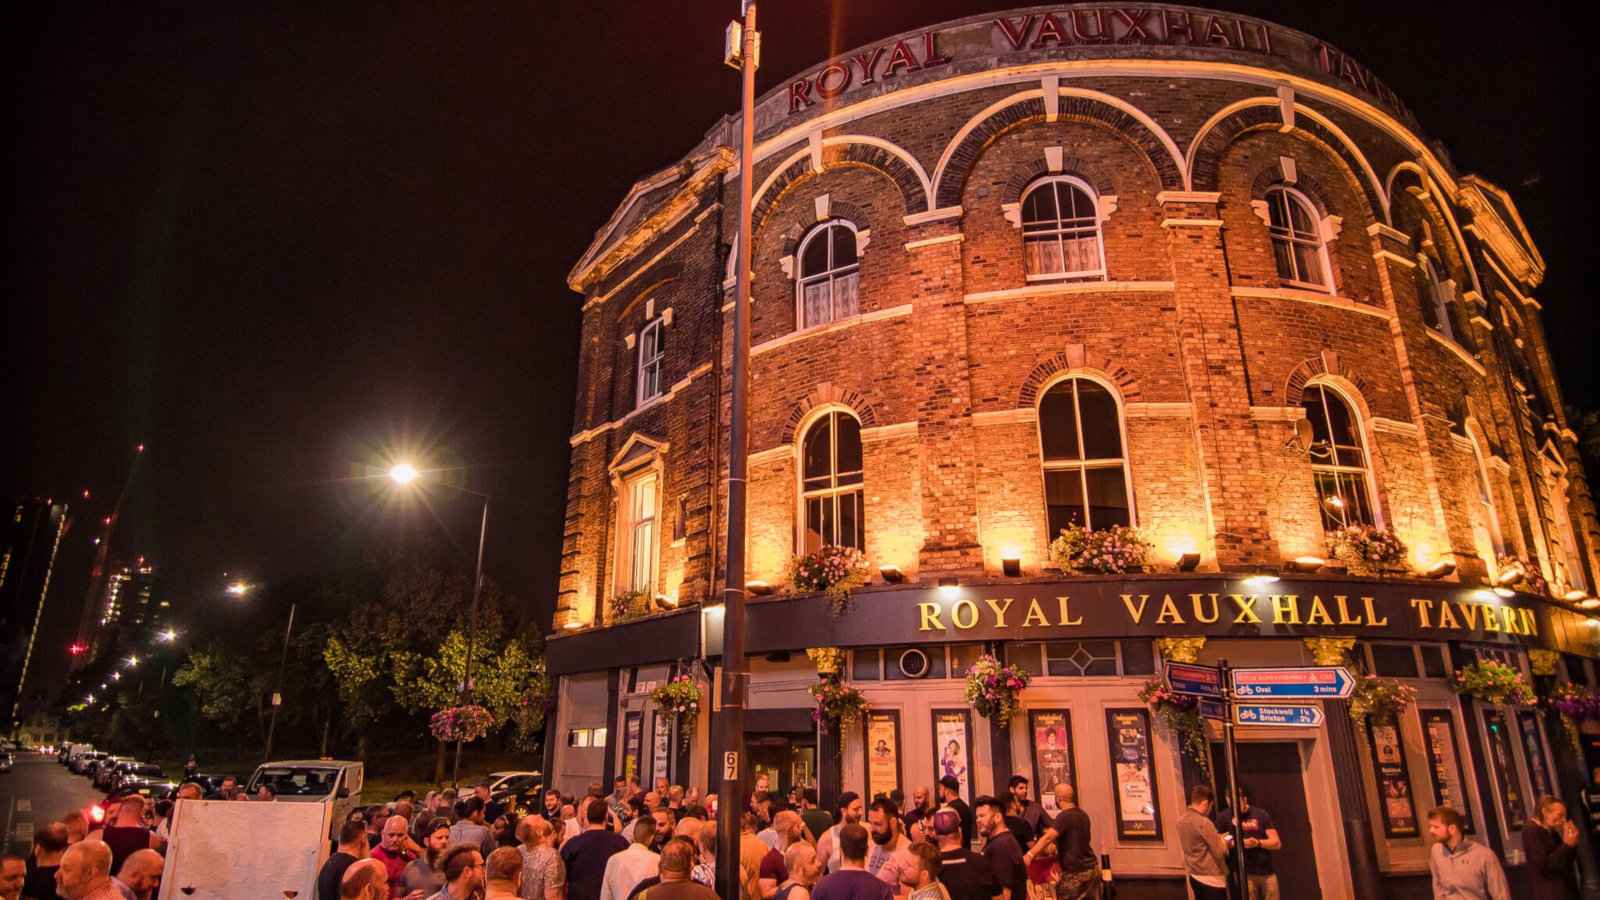 The exterior of the Royal Vauxhall Tavern in London at night, lit up and surrounded by people.